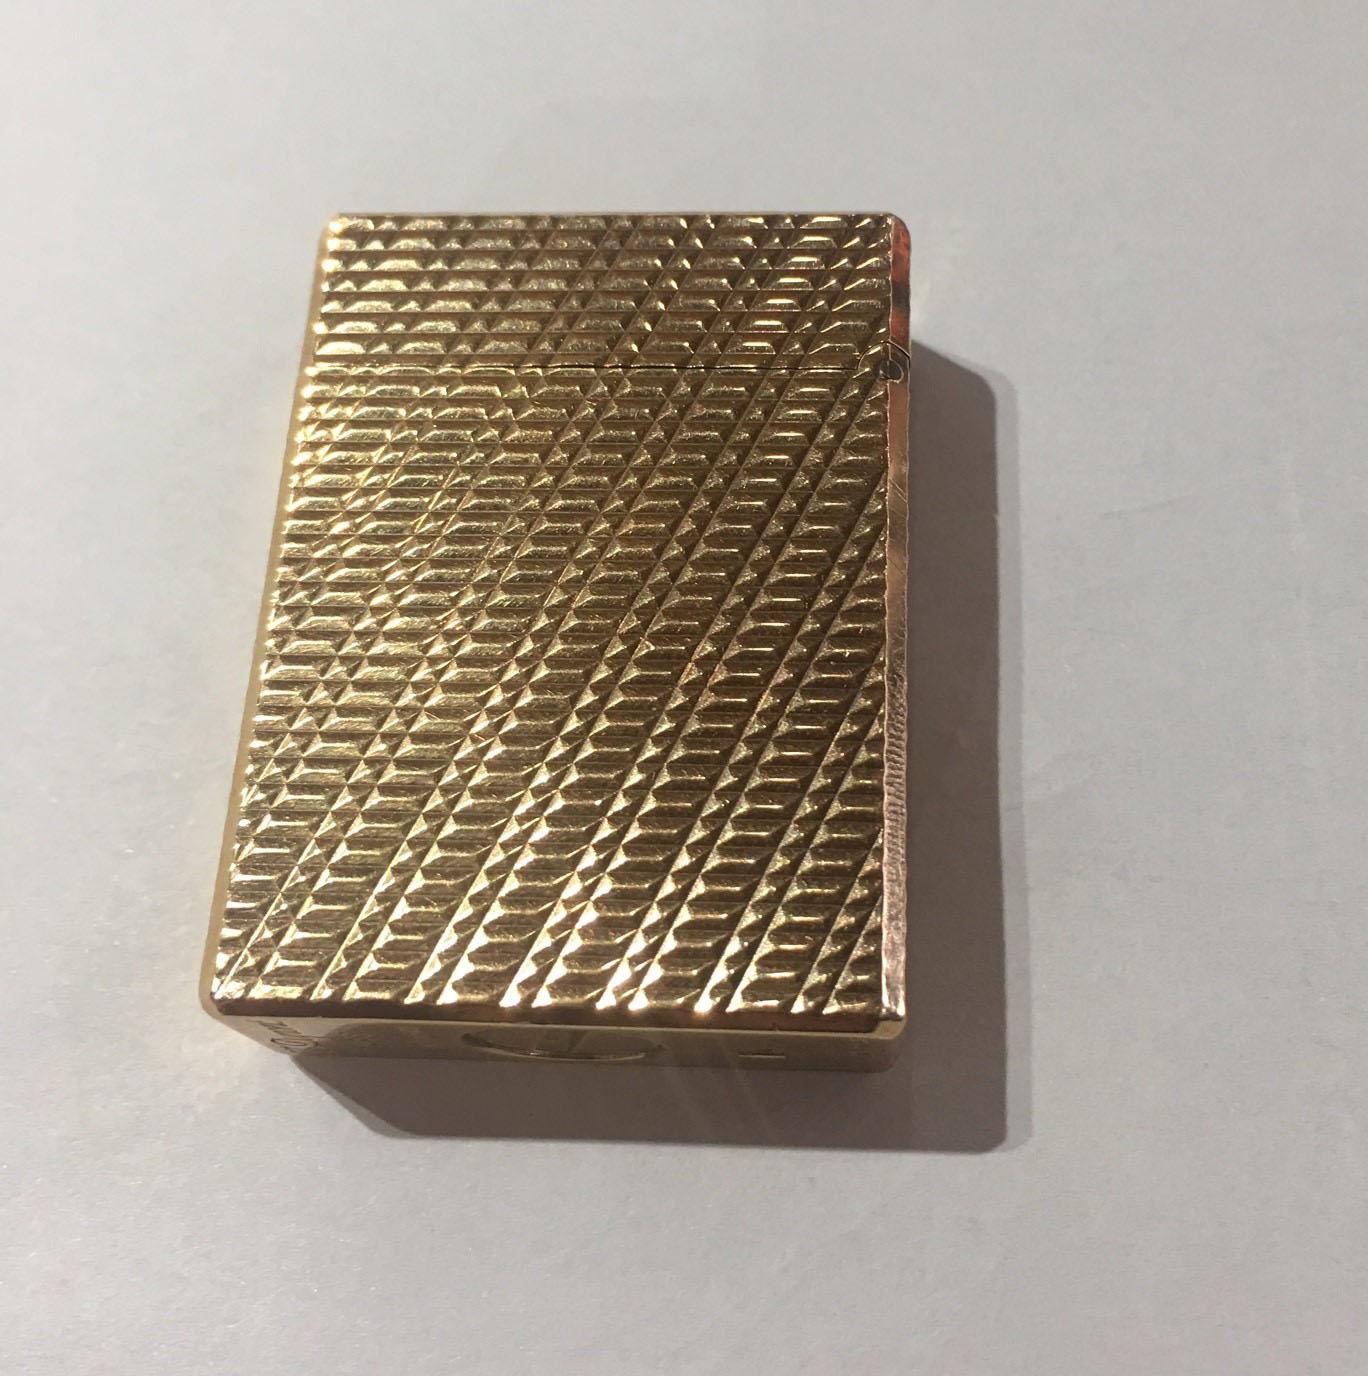 Dupont yellow gold-plated butane gas cigar cigarette lighter, marked: S.T. Dupont Paris made in France W 1993 and Dupont Logo, approximate size: 1.75